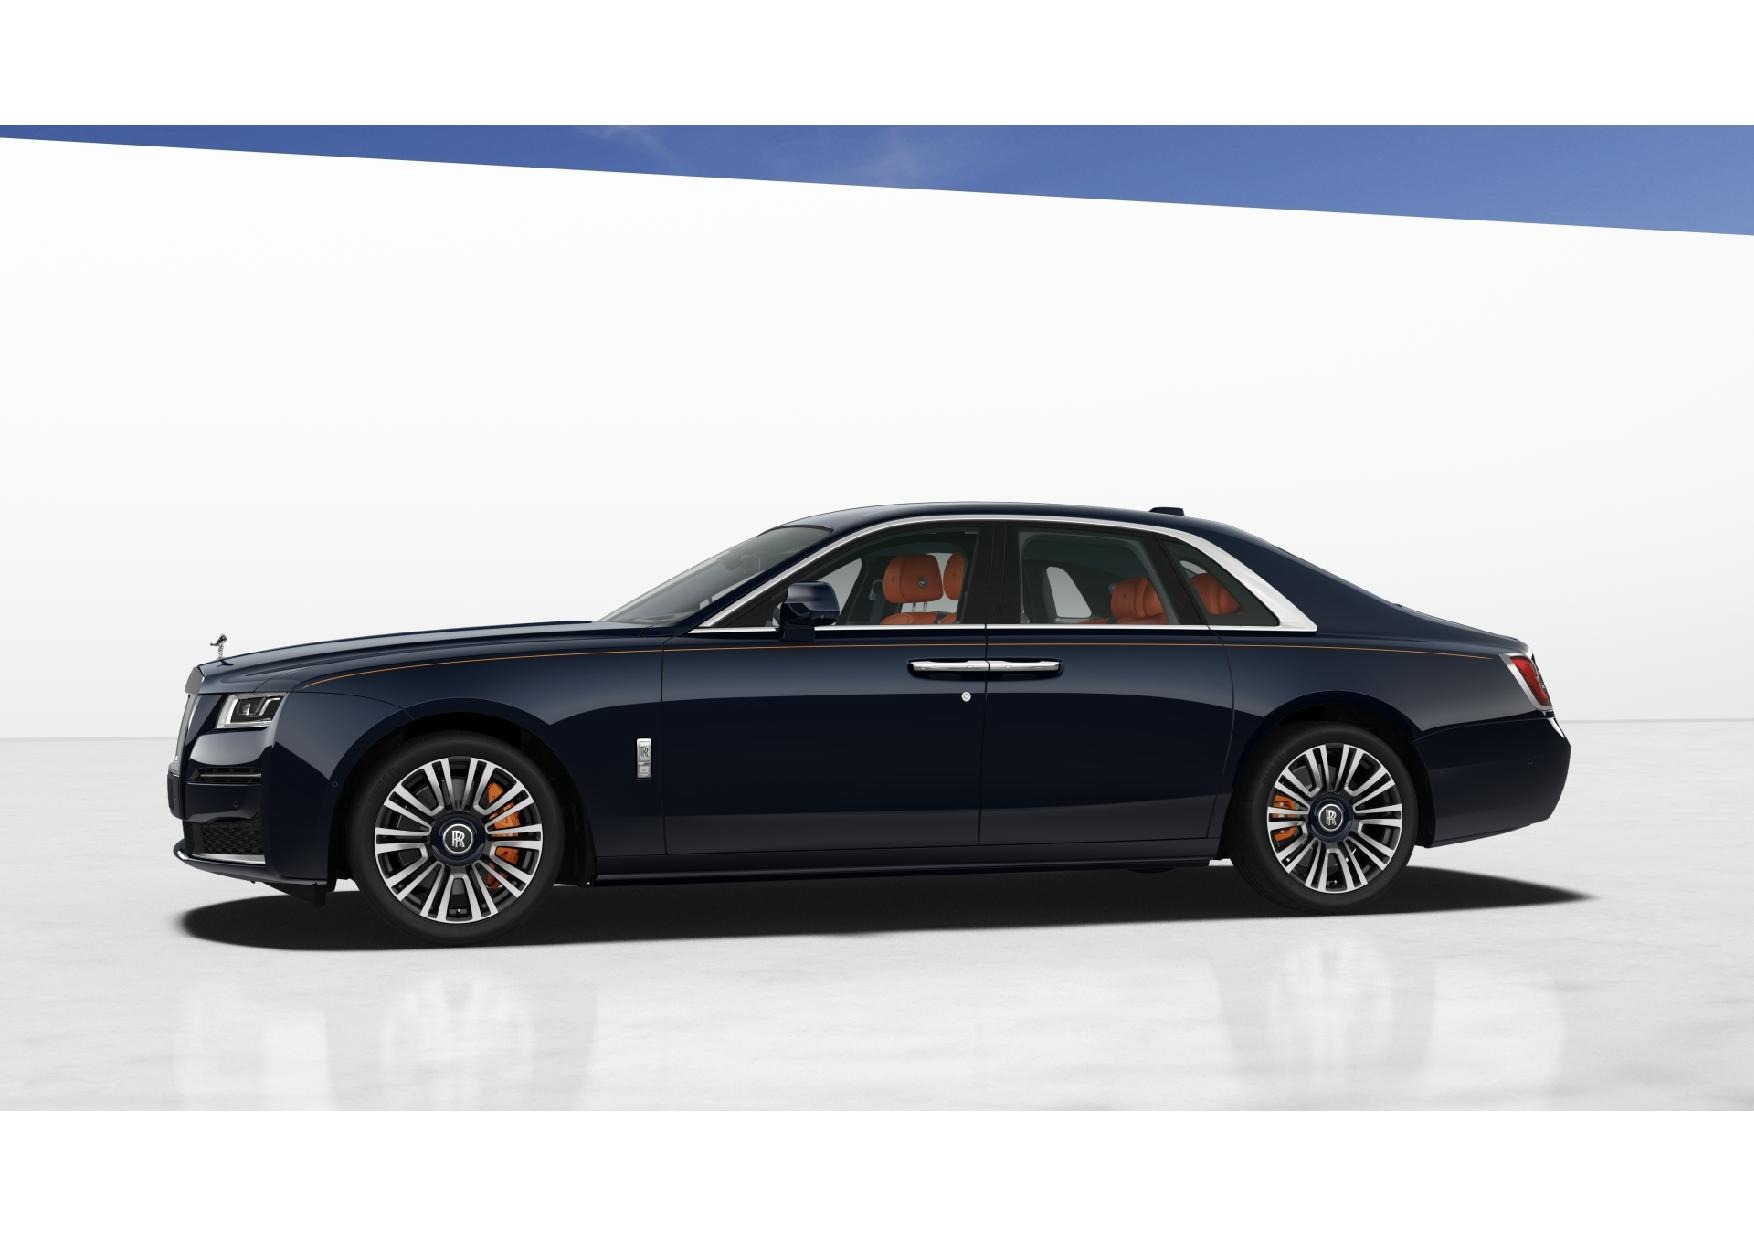 2023 Rolls-Royce Ghost Prices, Reviews, and Photos - MotorTrend